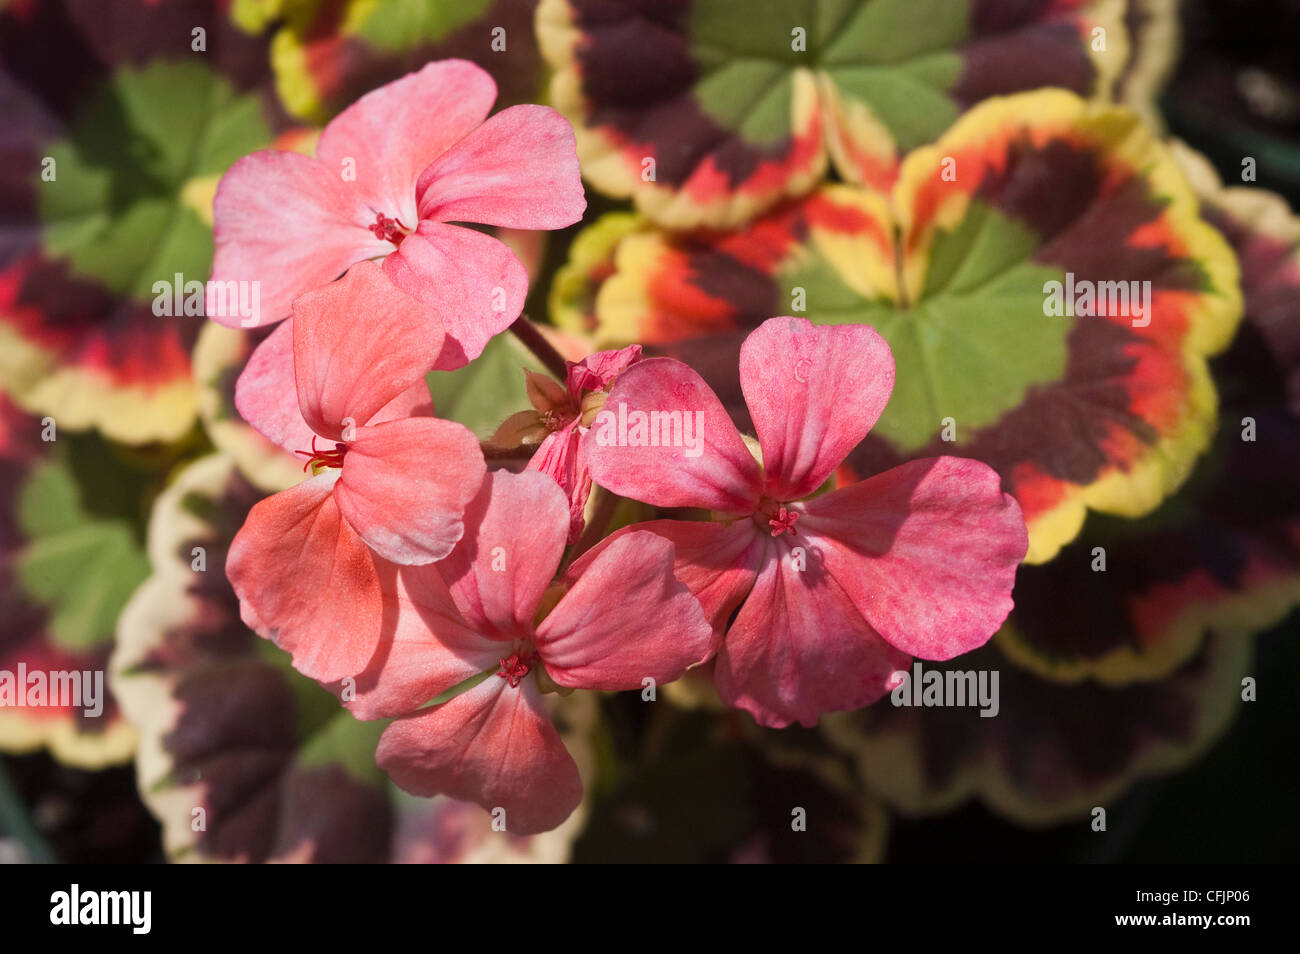 Pink flowers and white brown green fancy leaved foliage of zonal geranium or pelargonium Stock Photo